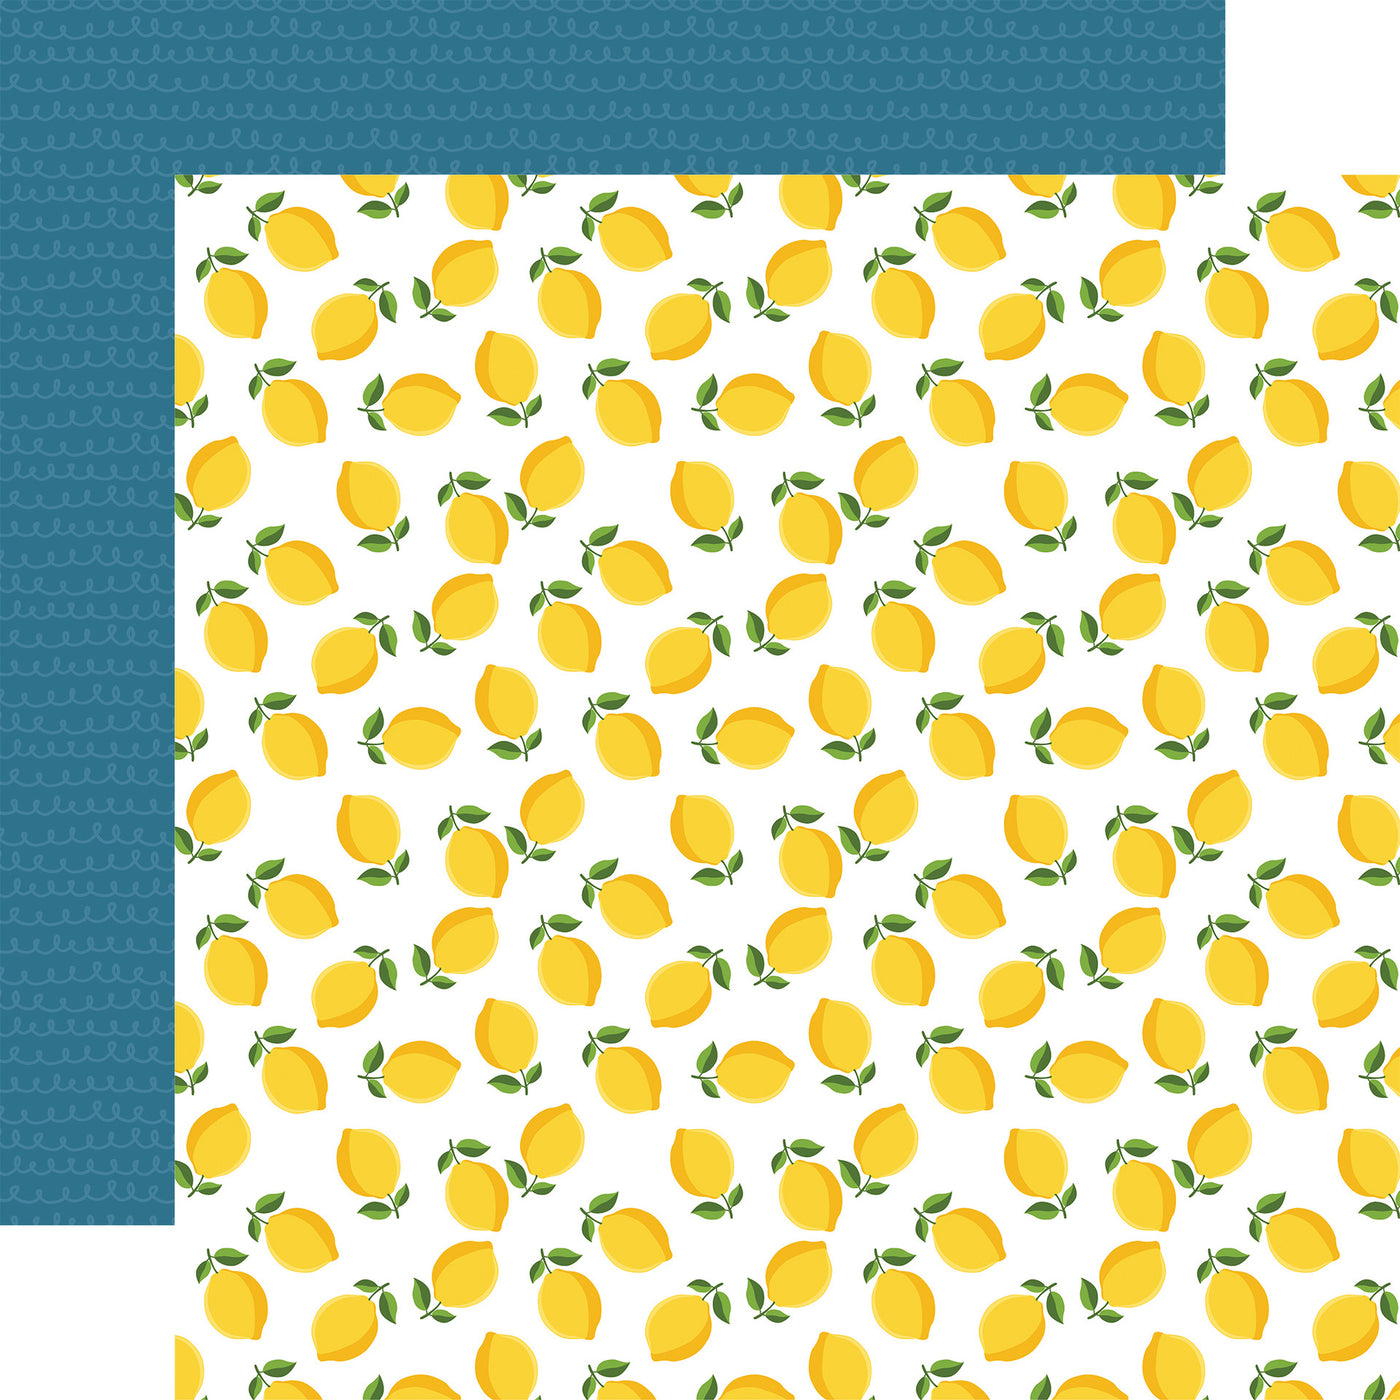 12x12 double-sided patterned paper. (Side A - yellow lemons with green leaves on a white background; Side B - blue squiggles on a blue background)